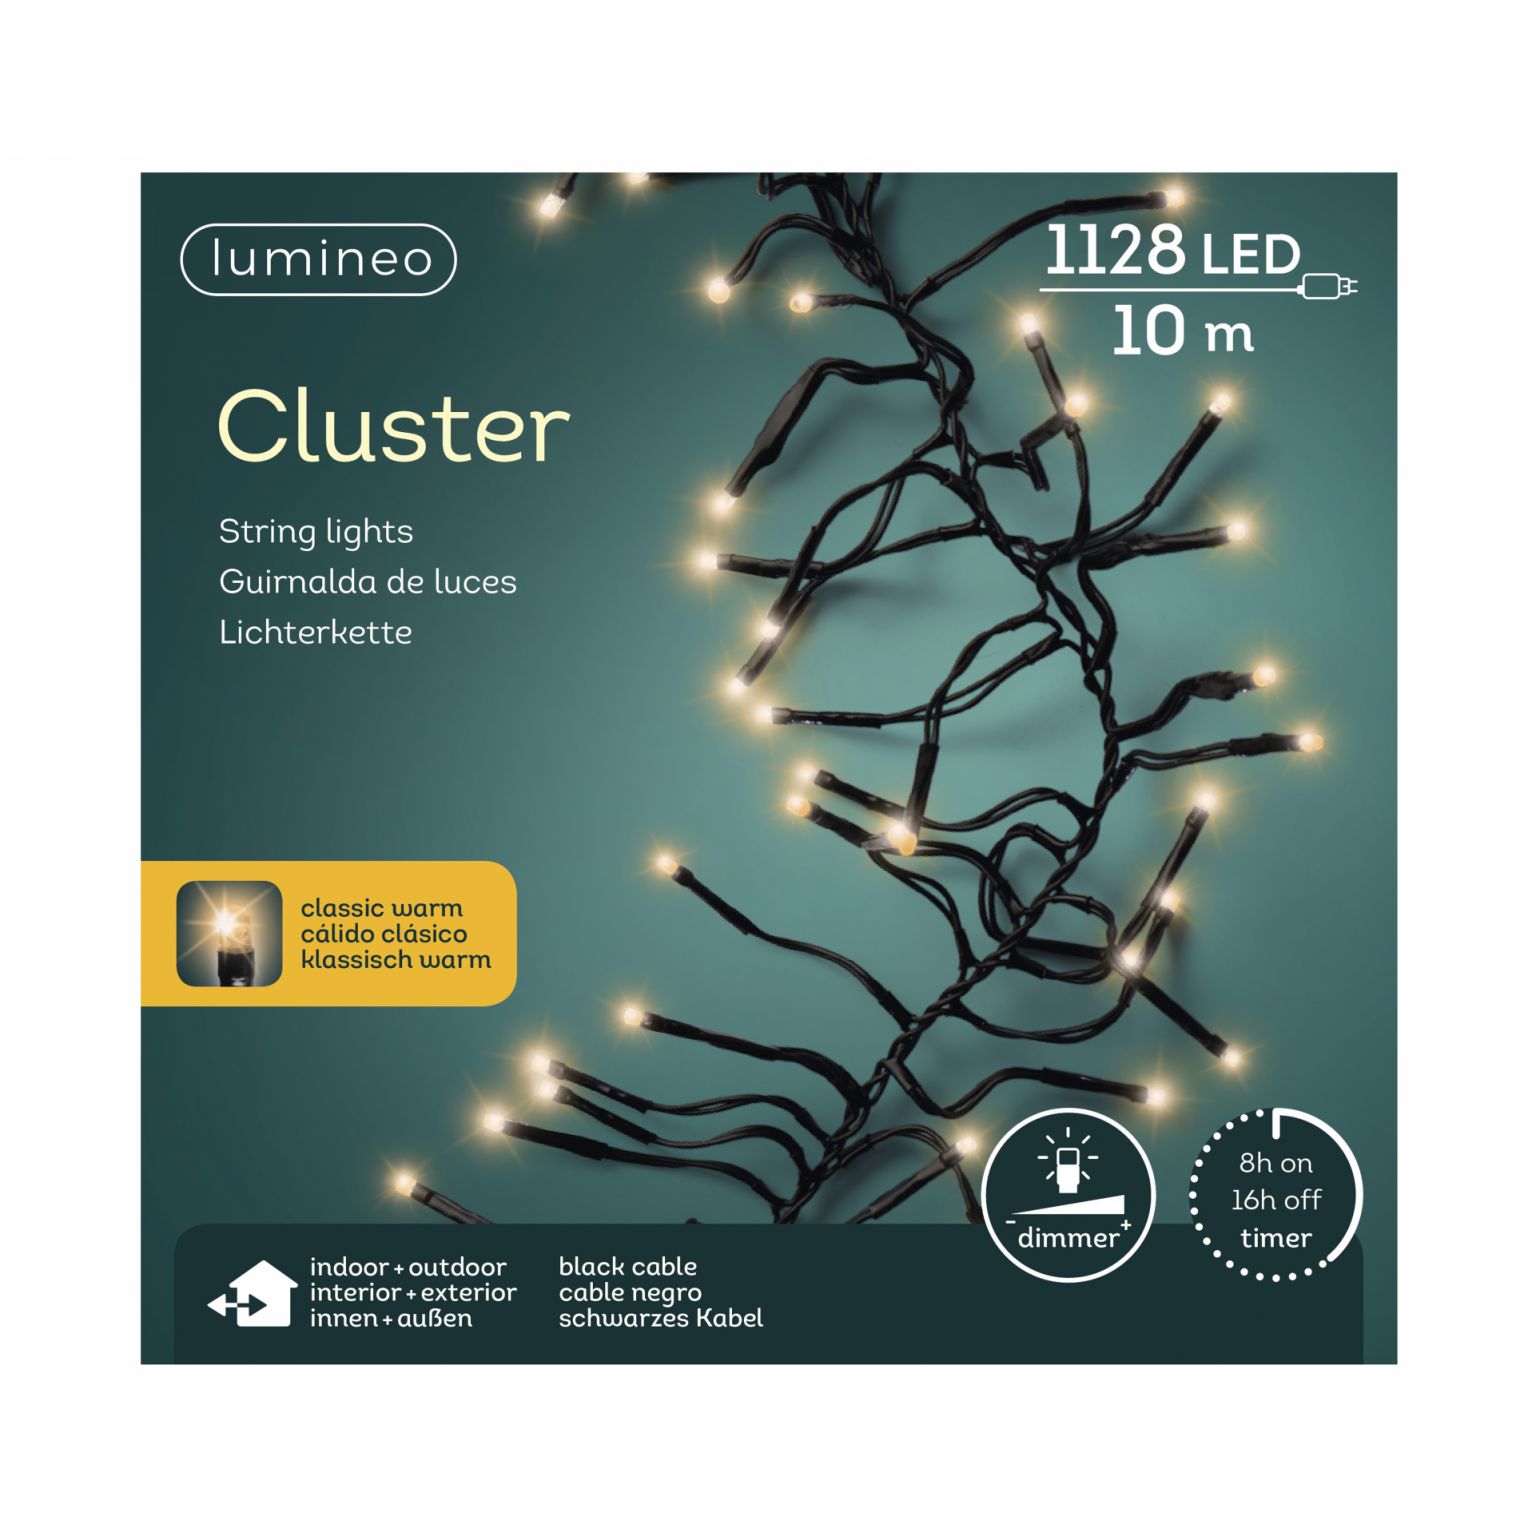 Clusterverlichting lumineo 1128- lamps LED 'classic warm